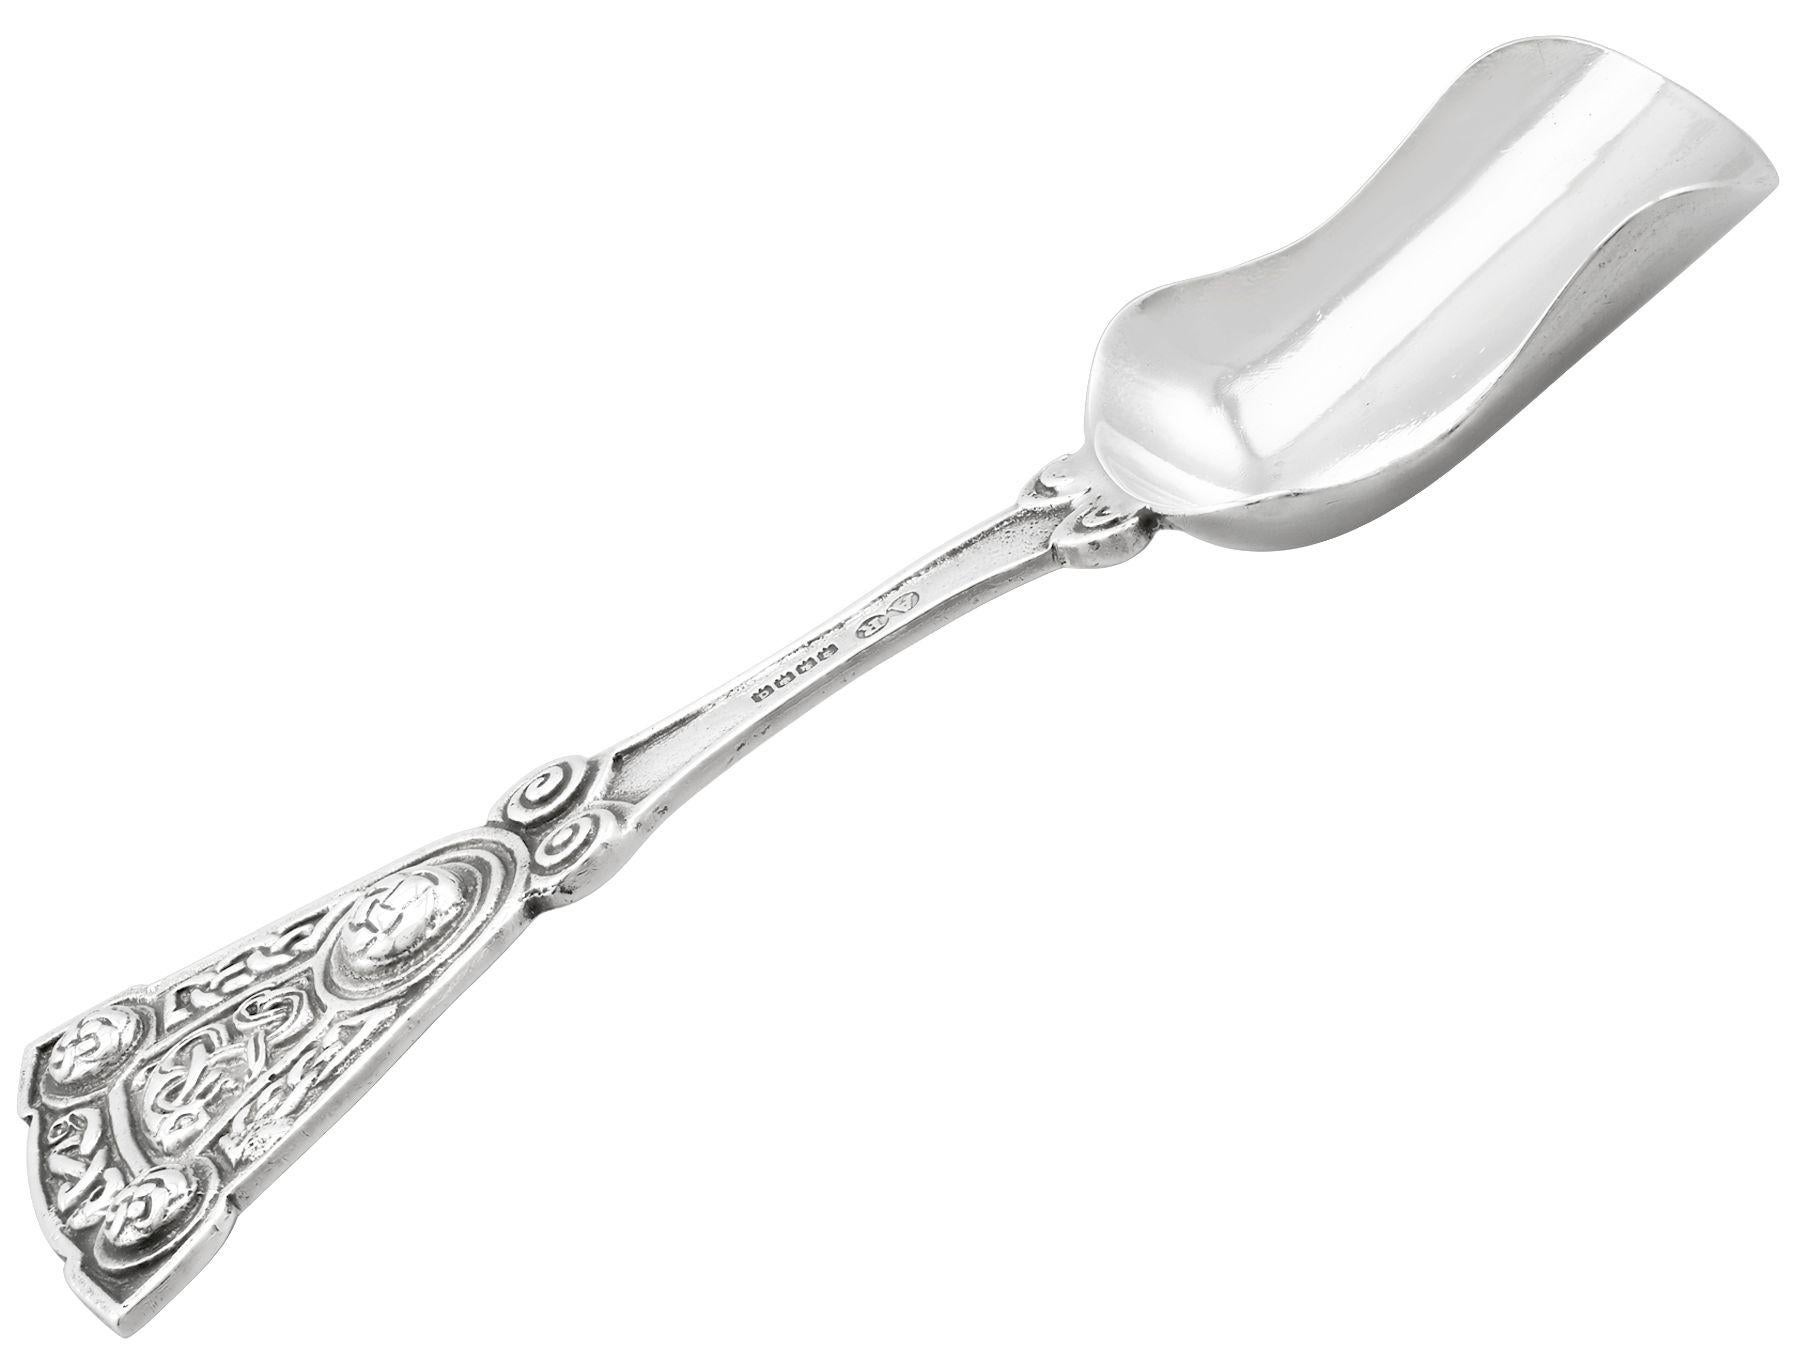 An exceptional, fine and impressive antique George V Scottish sterling silver caddy spoon; an addition to our teaware collection.

This exceptional antique George V Scottish sterling silver caddy spoon has a plain shovel shaped bowl.

The handle